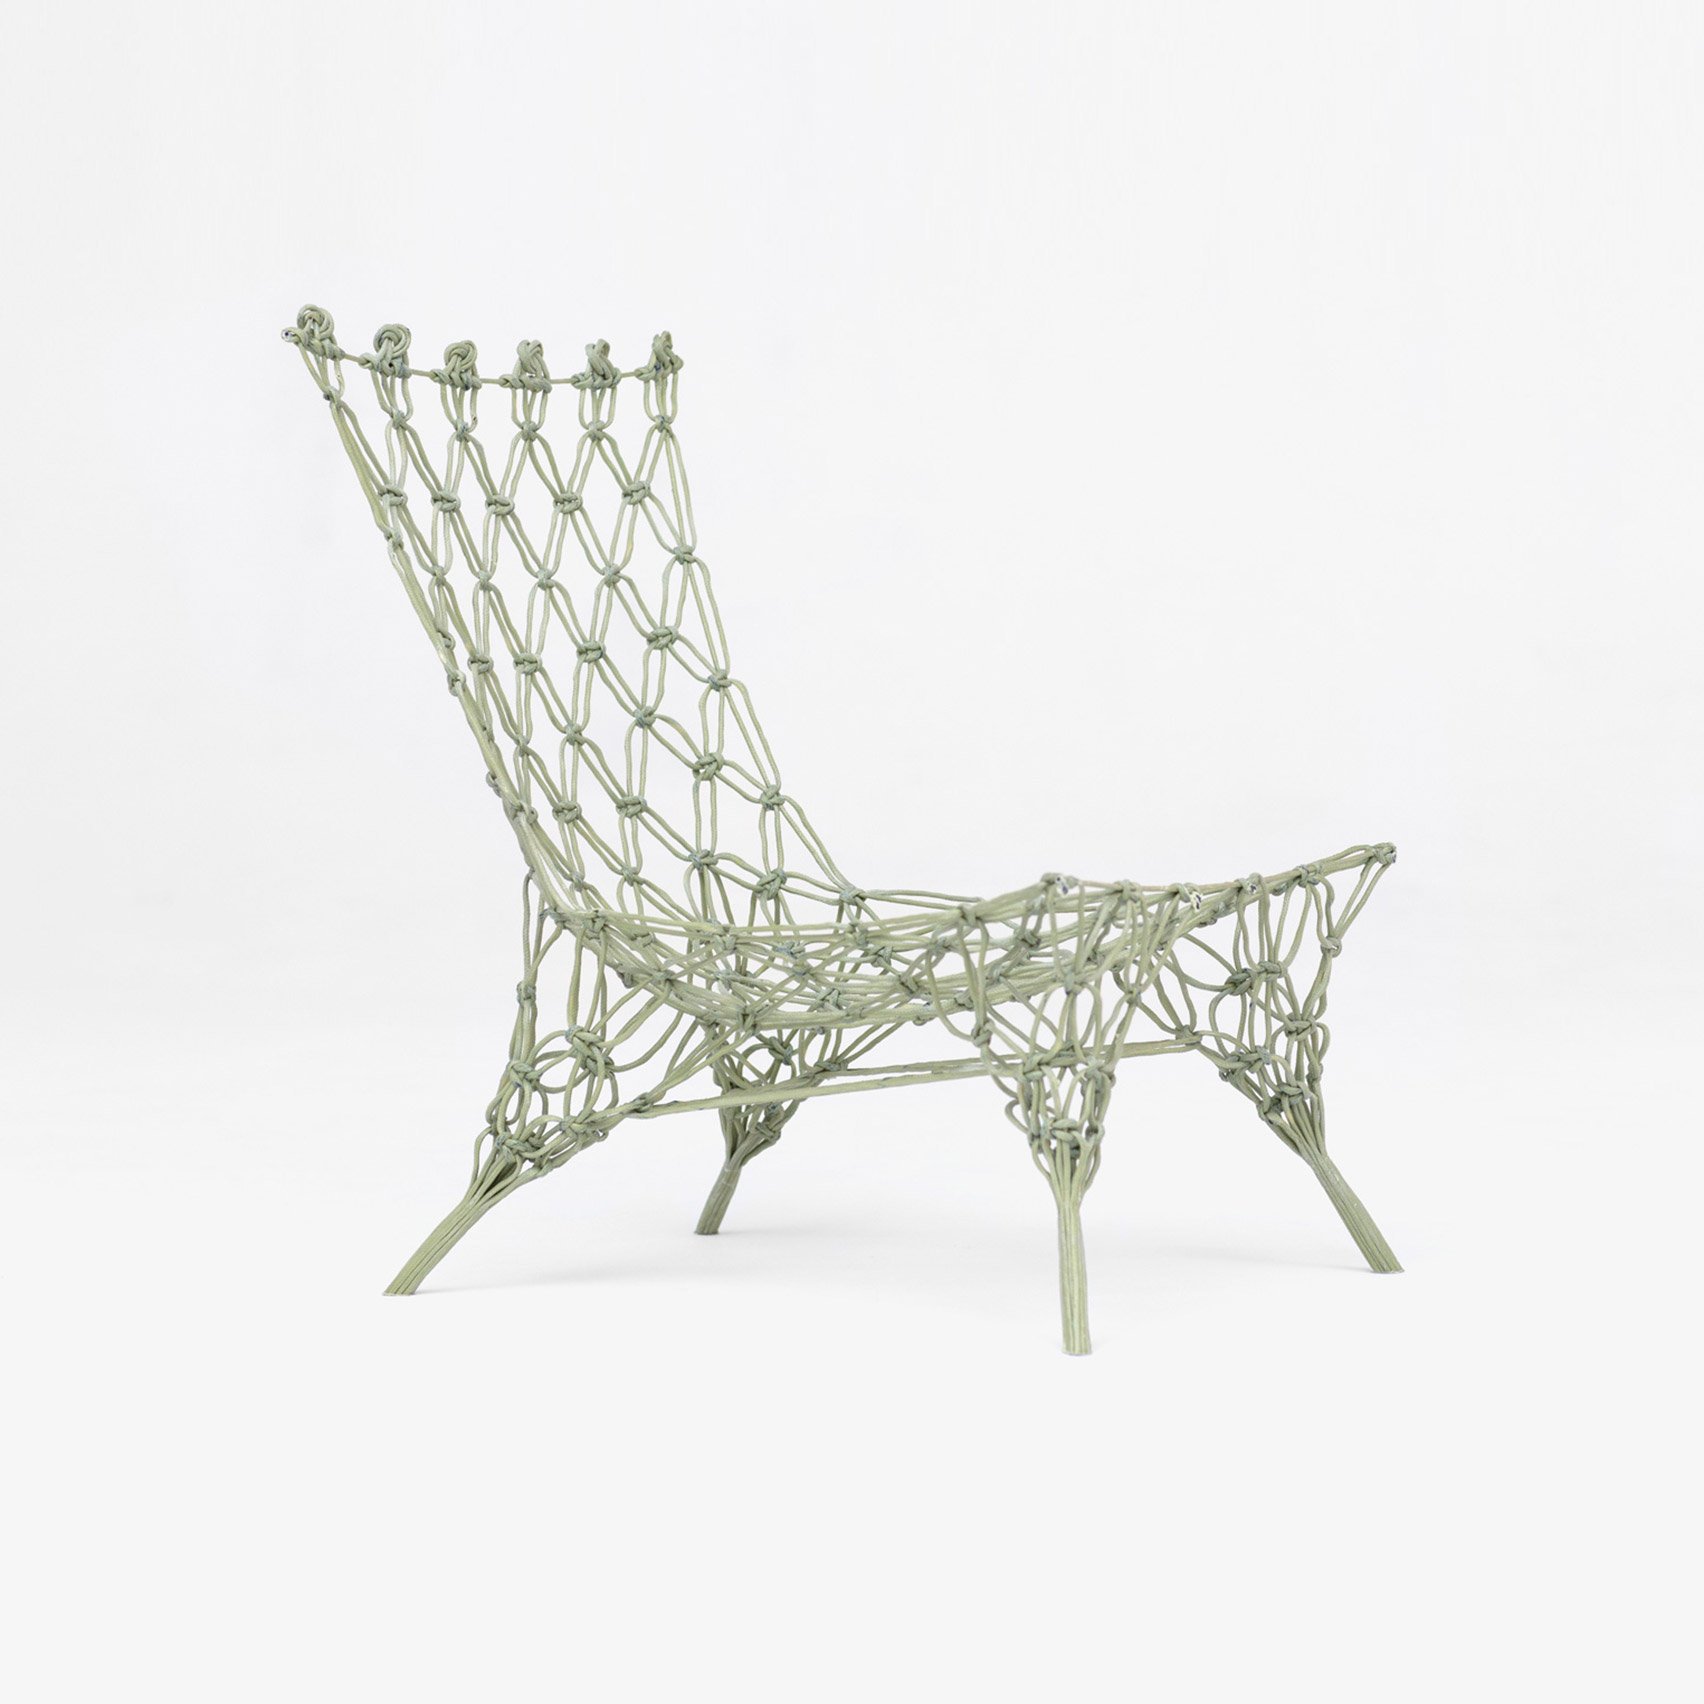 Knotted Chair by Marcel Wanders was presented by Droog 